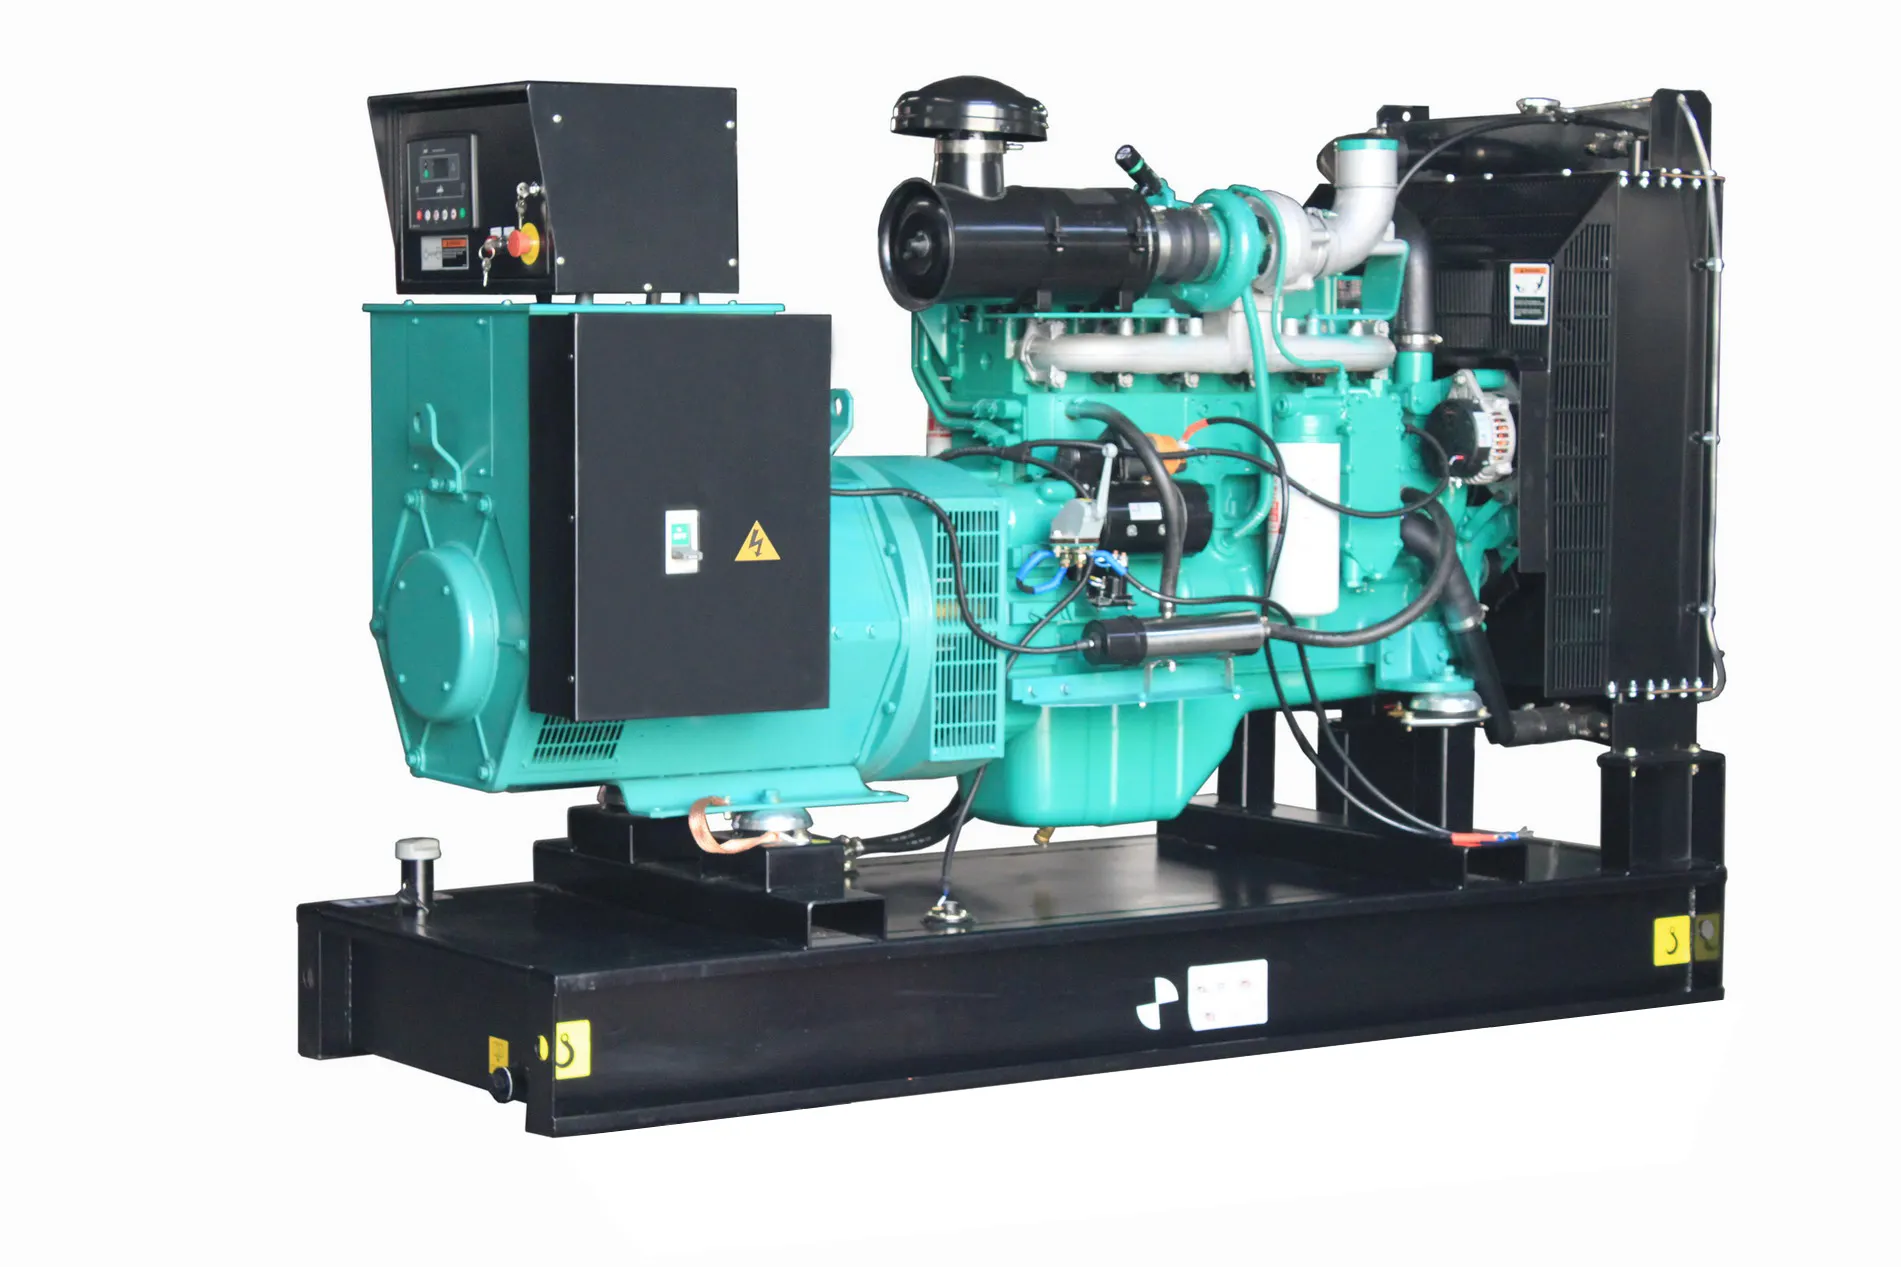 High Quality 40KW/50KVA Electrical Power Genset With Engine 4BTA3.9-G2 Generator 3 Phase Silent Soundproof Genset